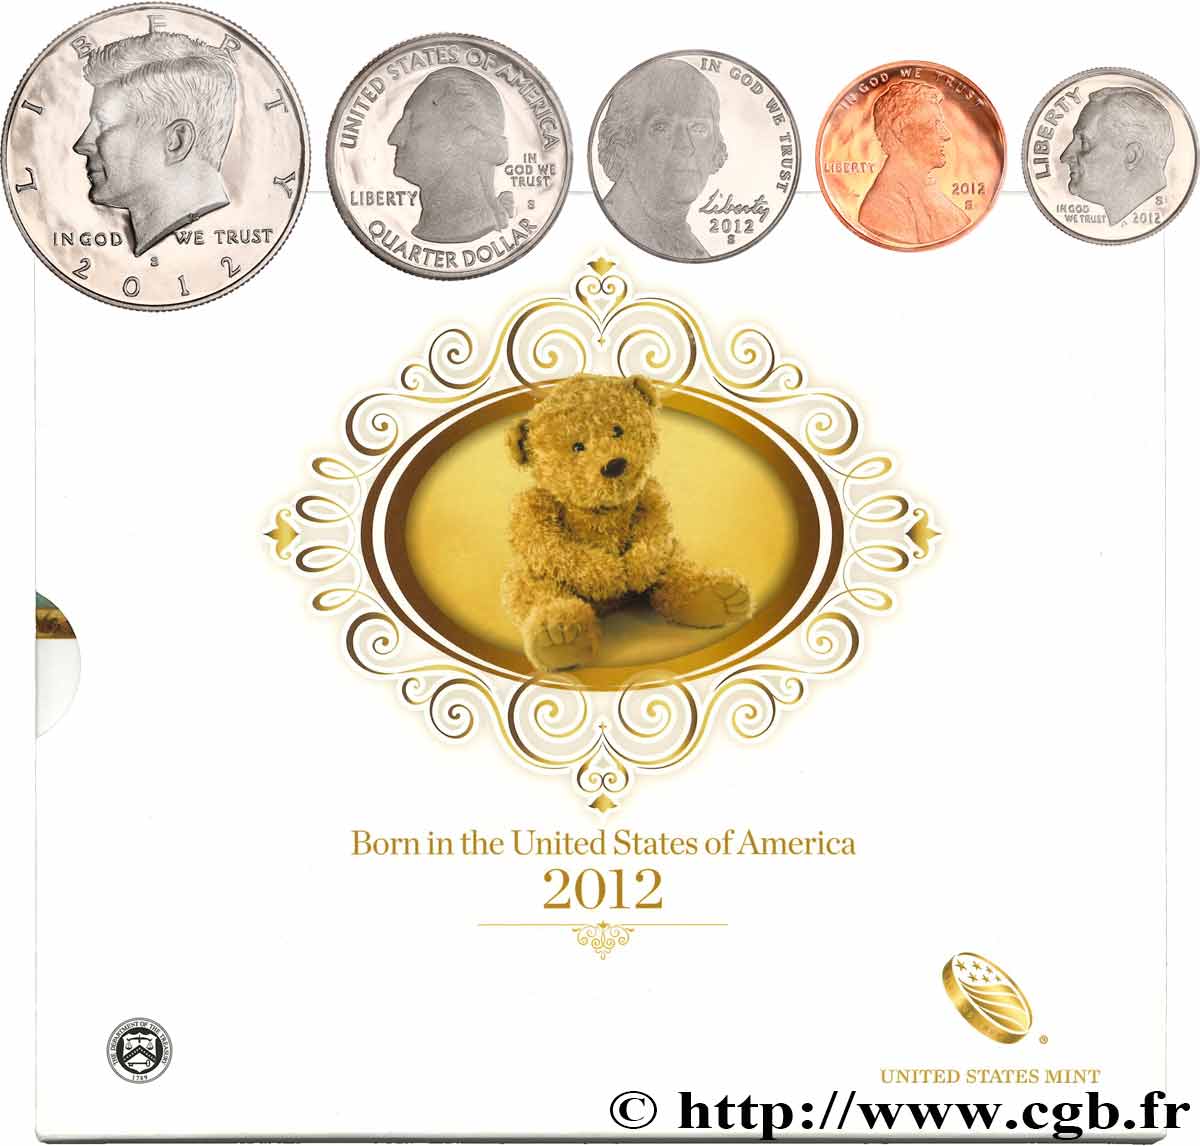 UNITED STATES OF AMERICA BORN IN THE USA COIN SET - PROOF - 5 monnaies 2012 S- San Francisco MS 